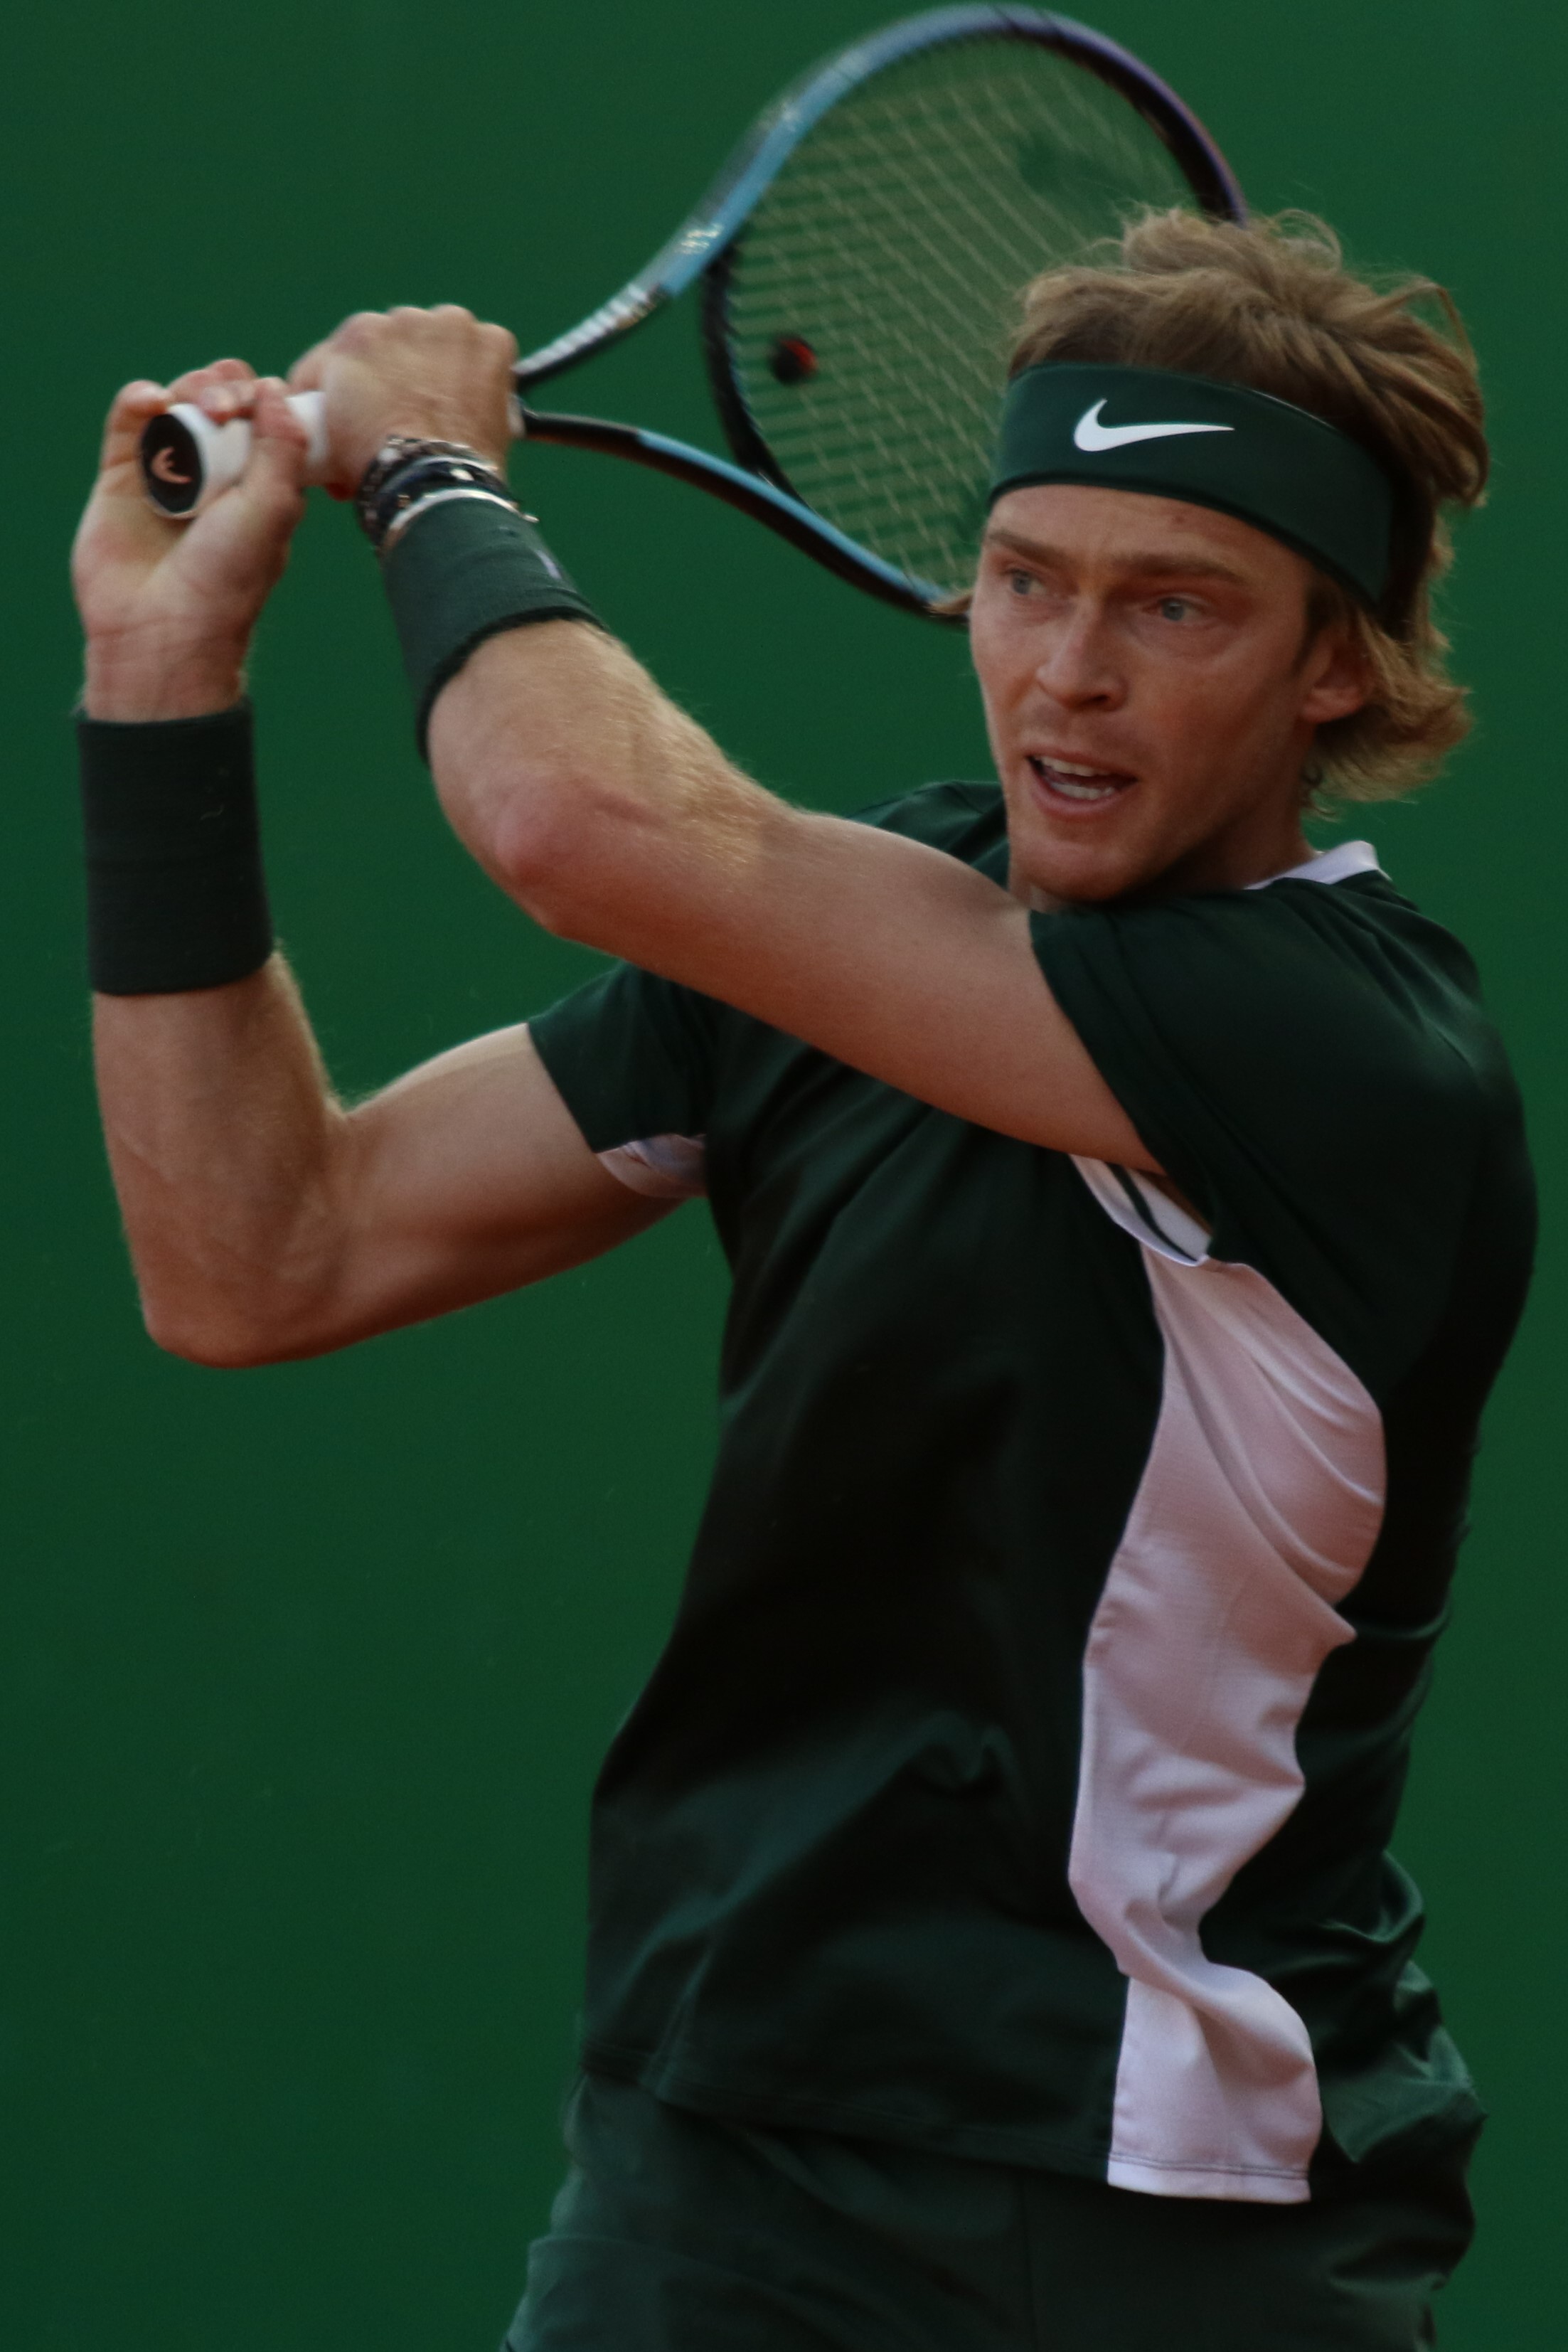 Tennis-Rublev edges wunderkind Rune with lucky net cord on match point